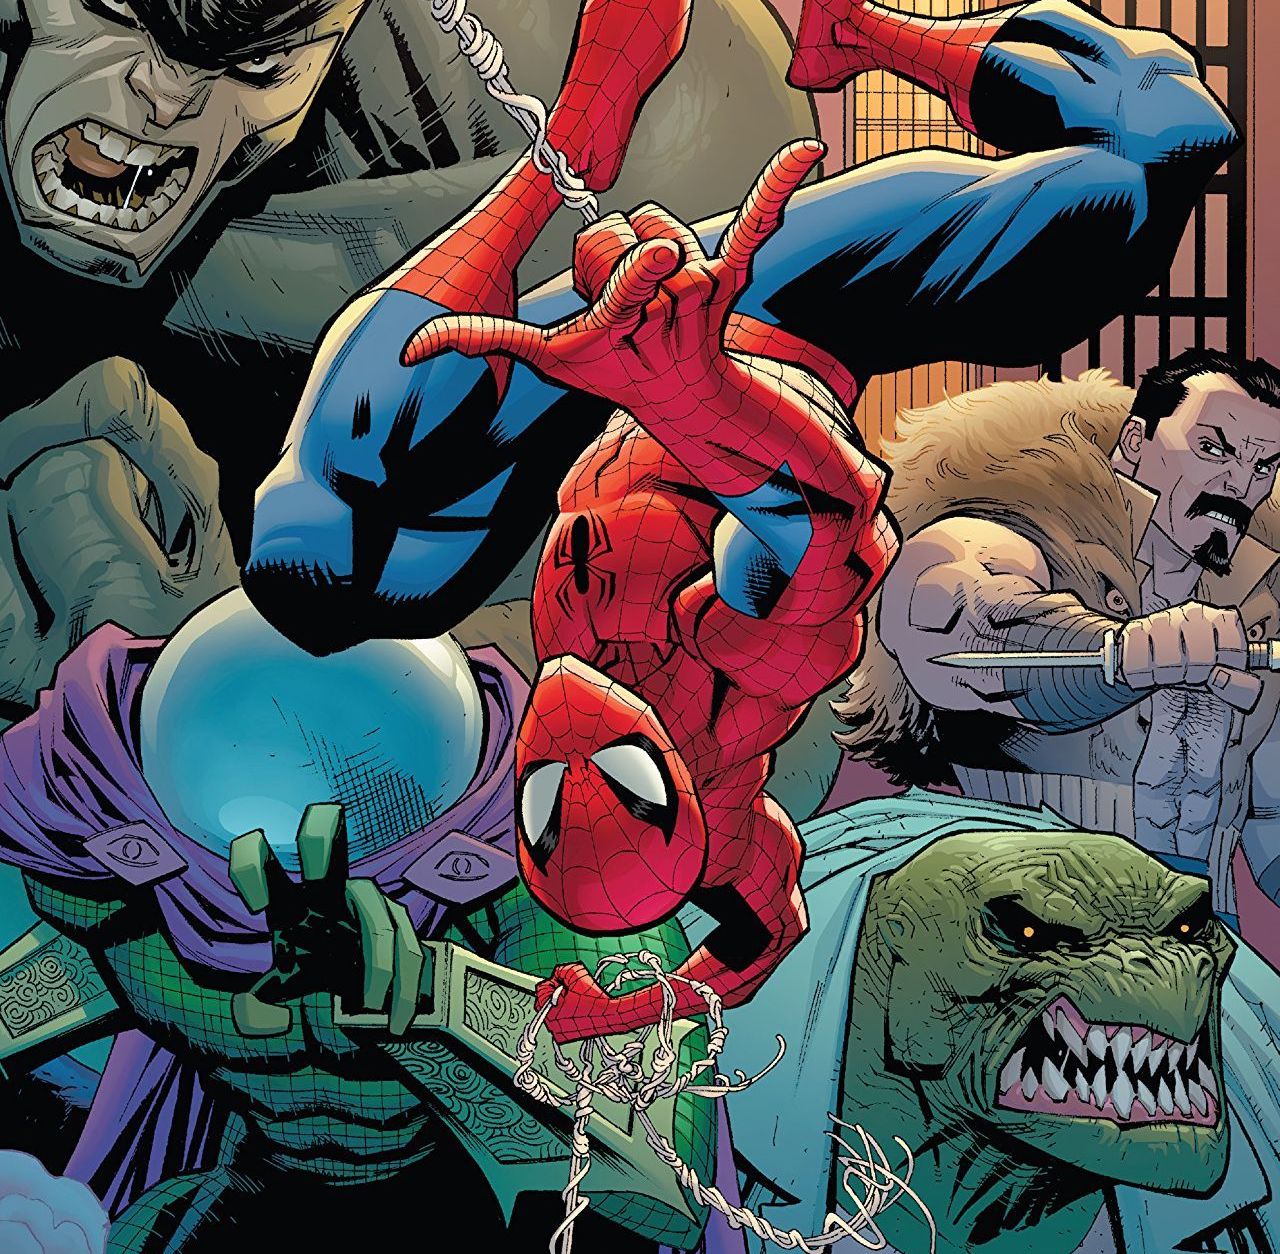 Amazing Spider-Man #1 Review: It has all the Parker luck